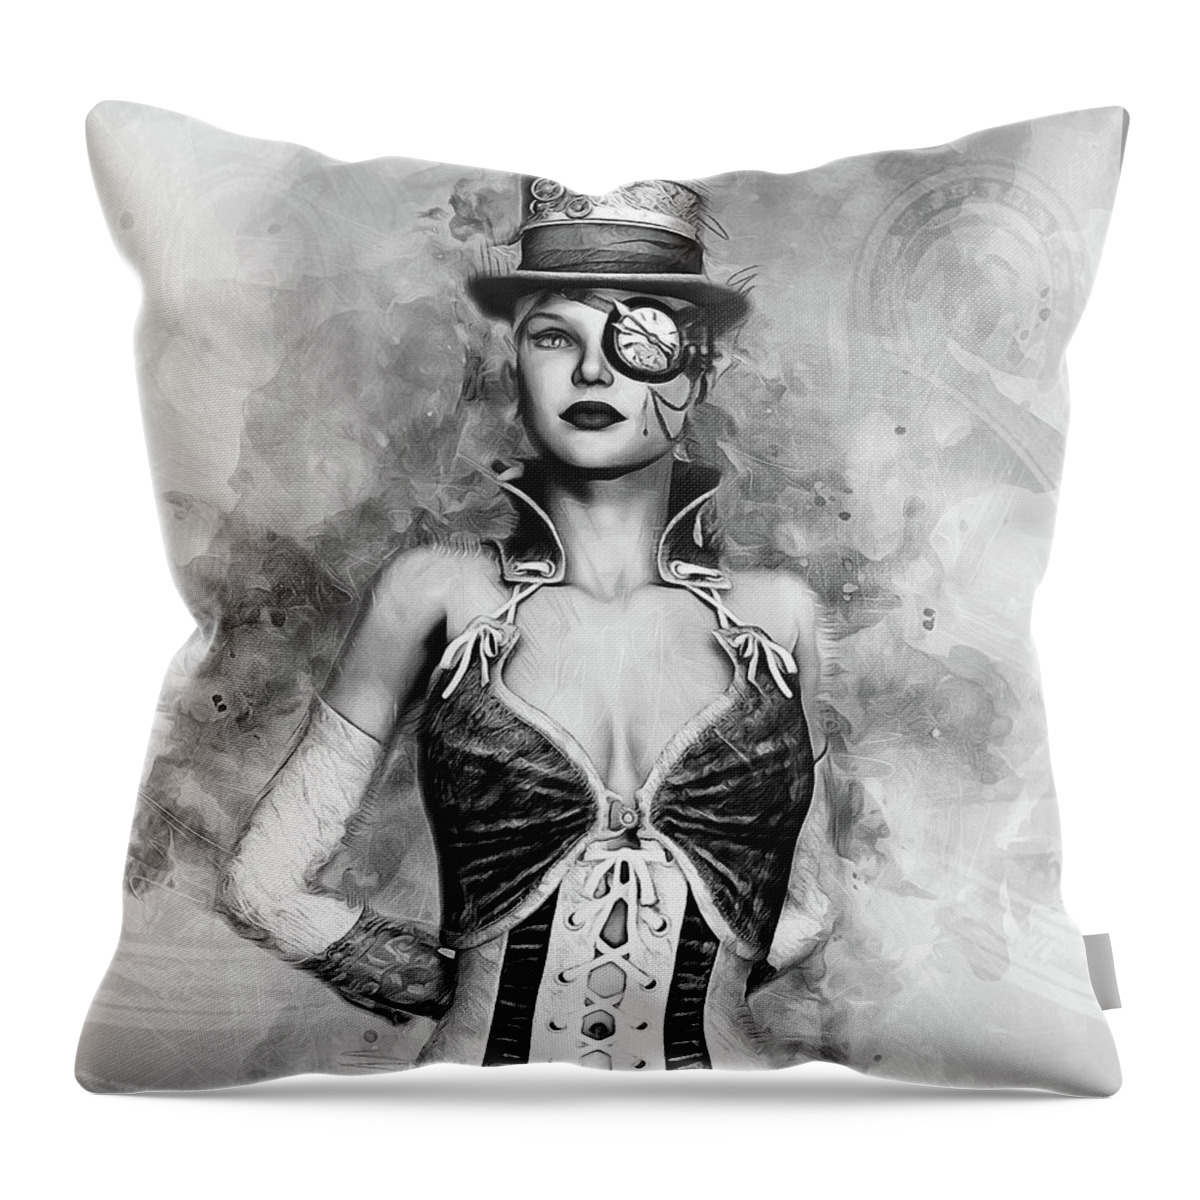 Steam Punk Throw Pillow featuring the digital art Lady Steampunk by Ian Mitchell